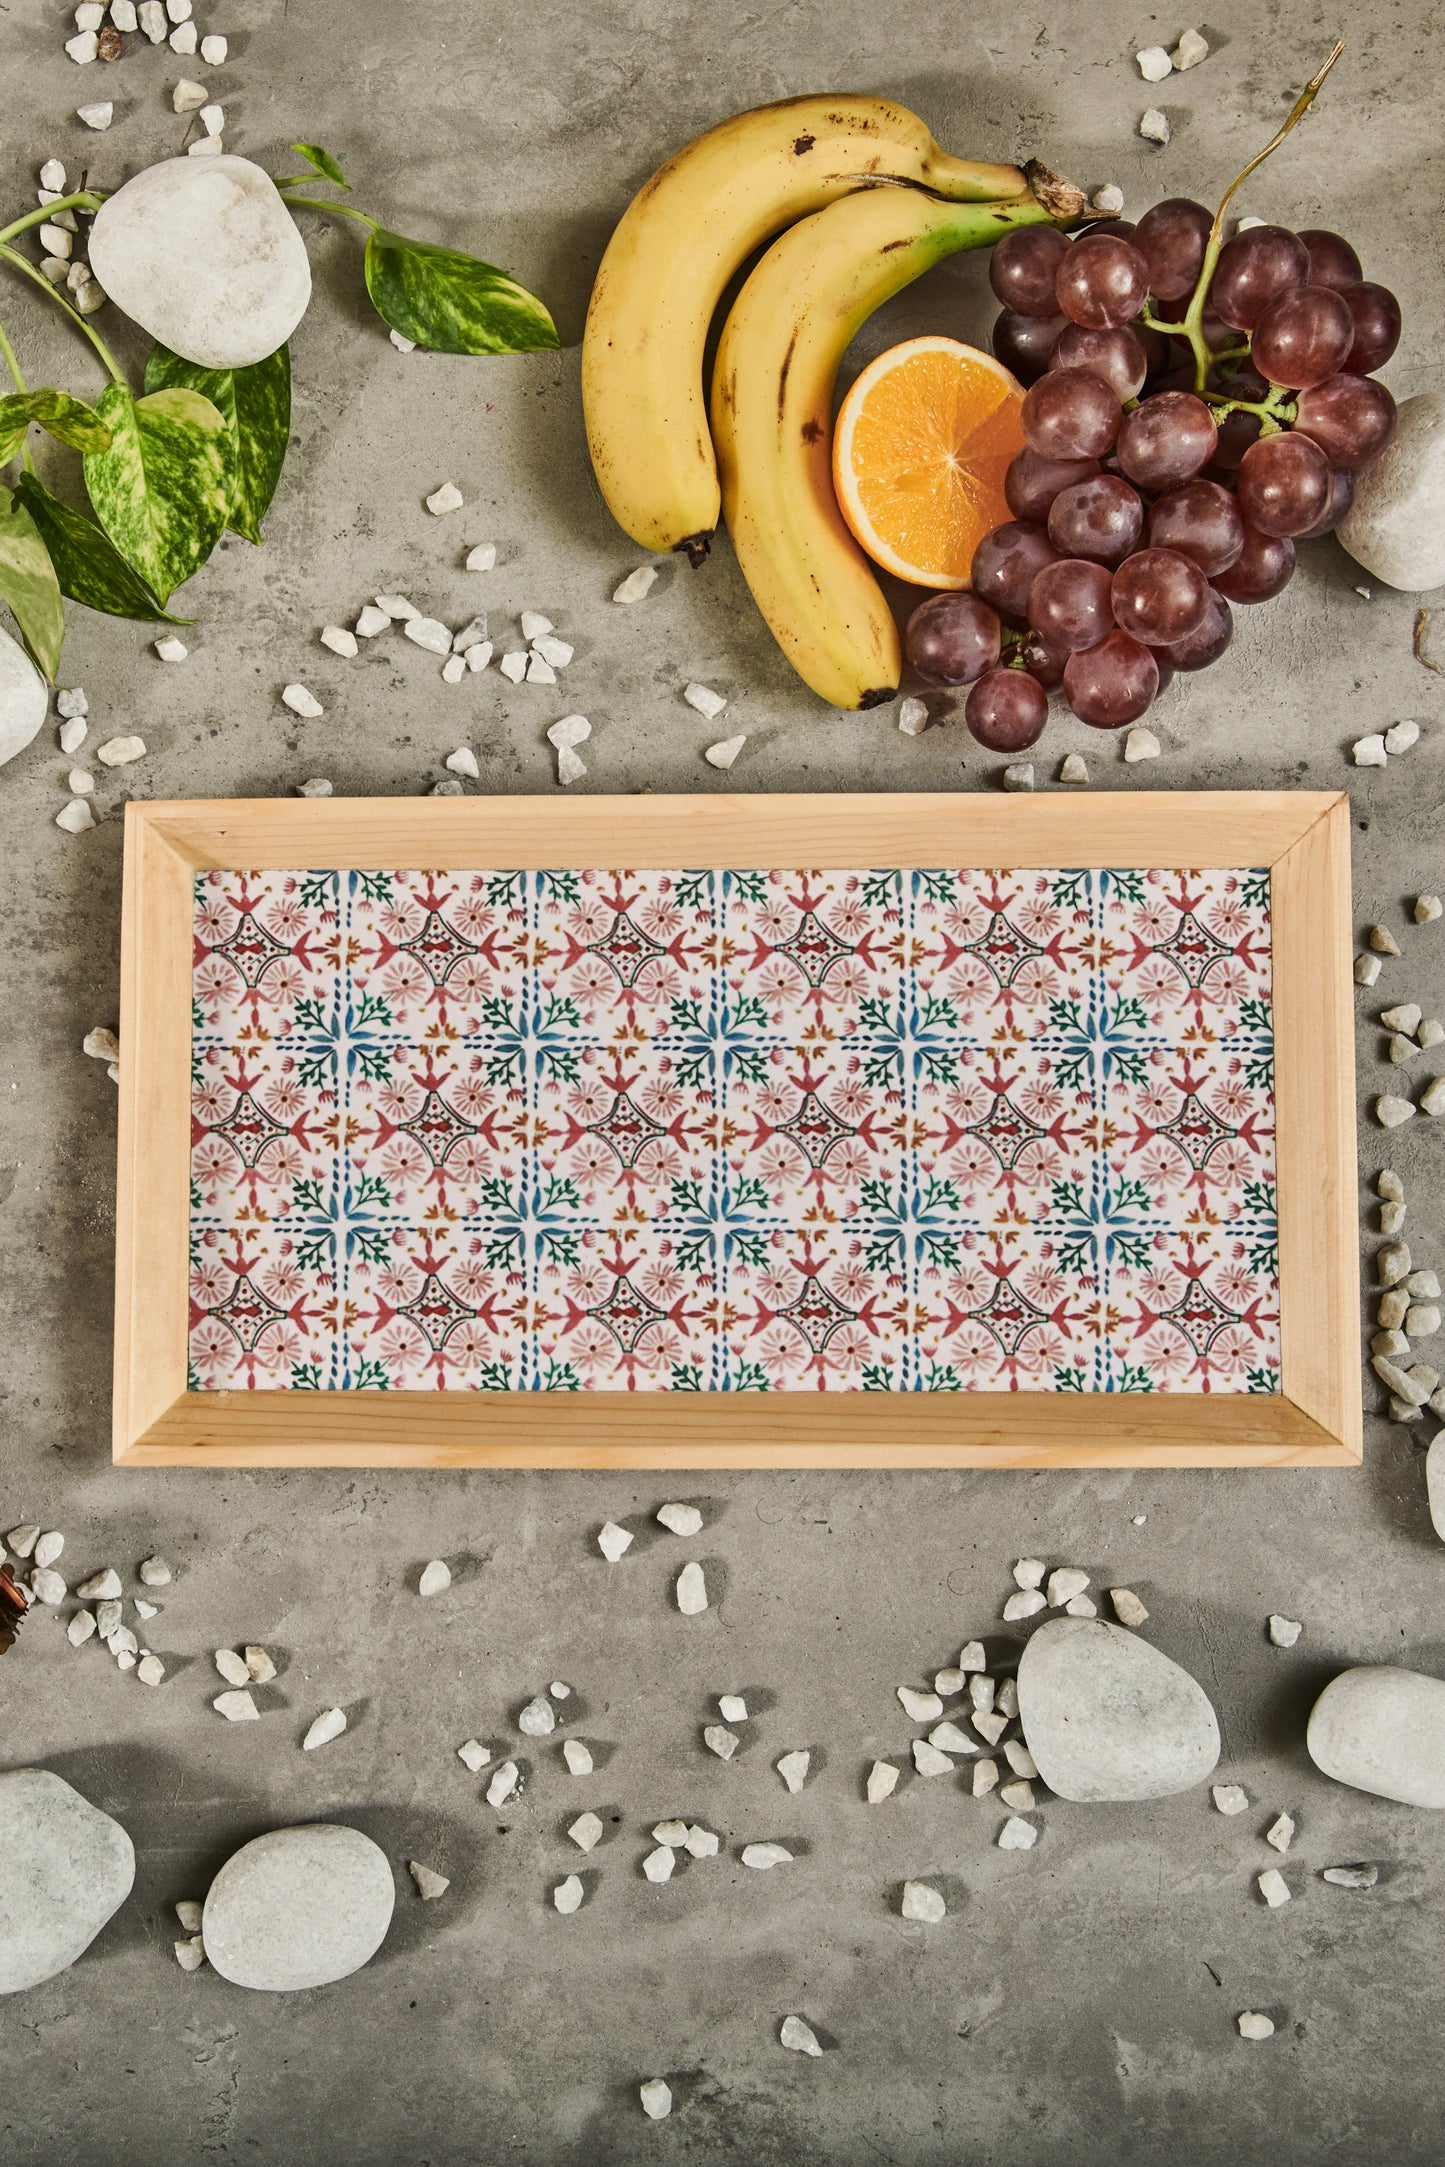 A Tiny Mistake  Turkish Pink Tiles Rectangle Wooden Serving Tray, 35 x 20 x 2 cm